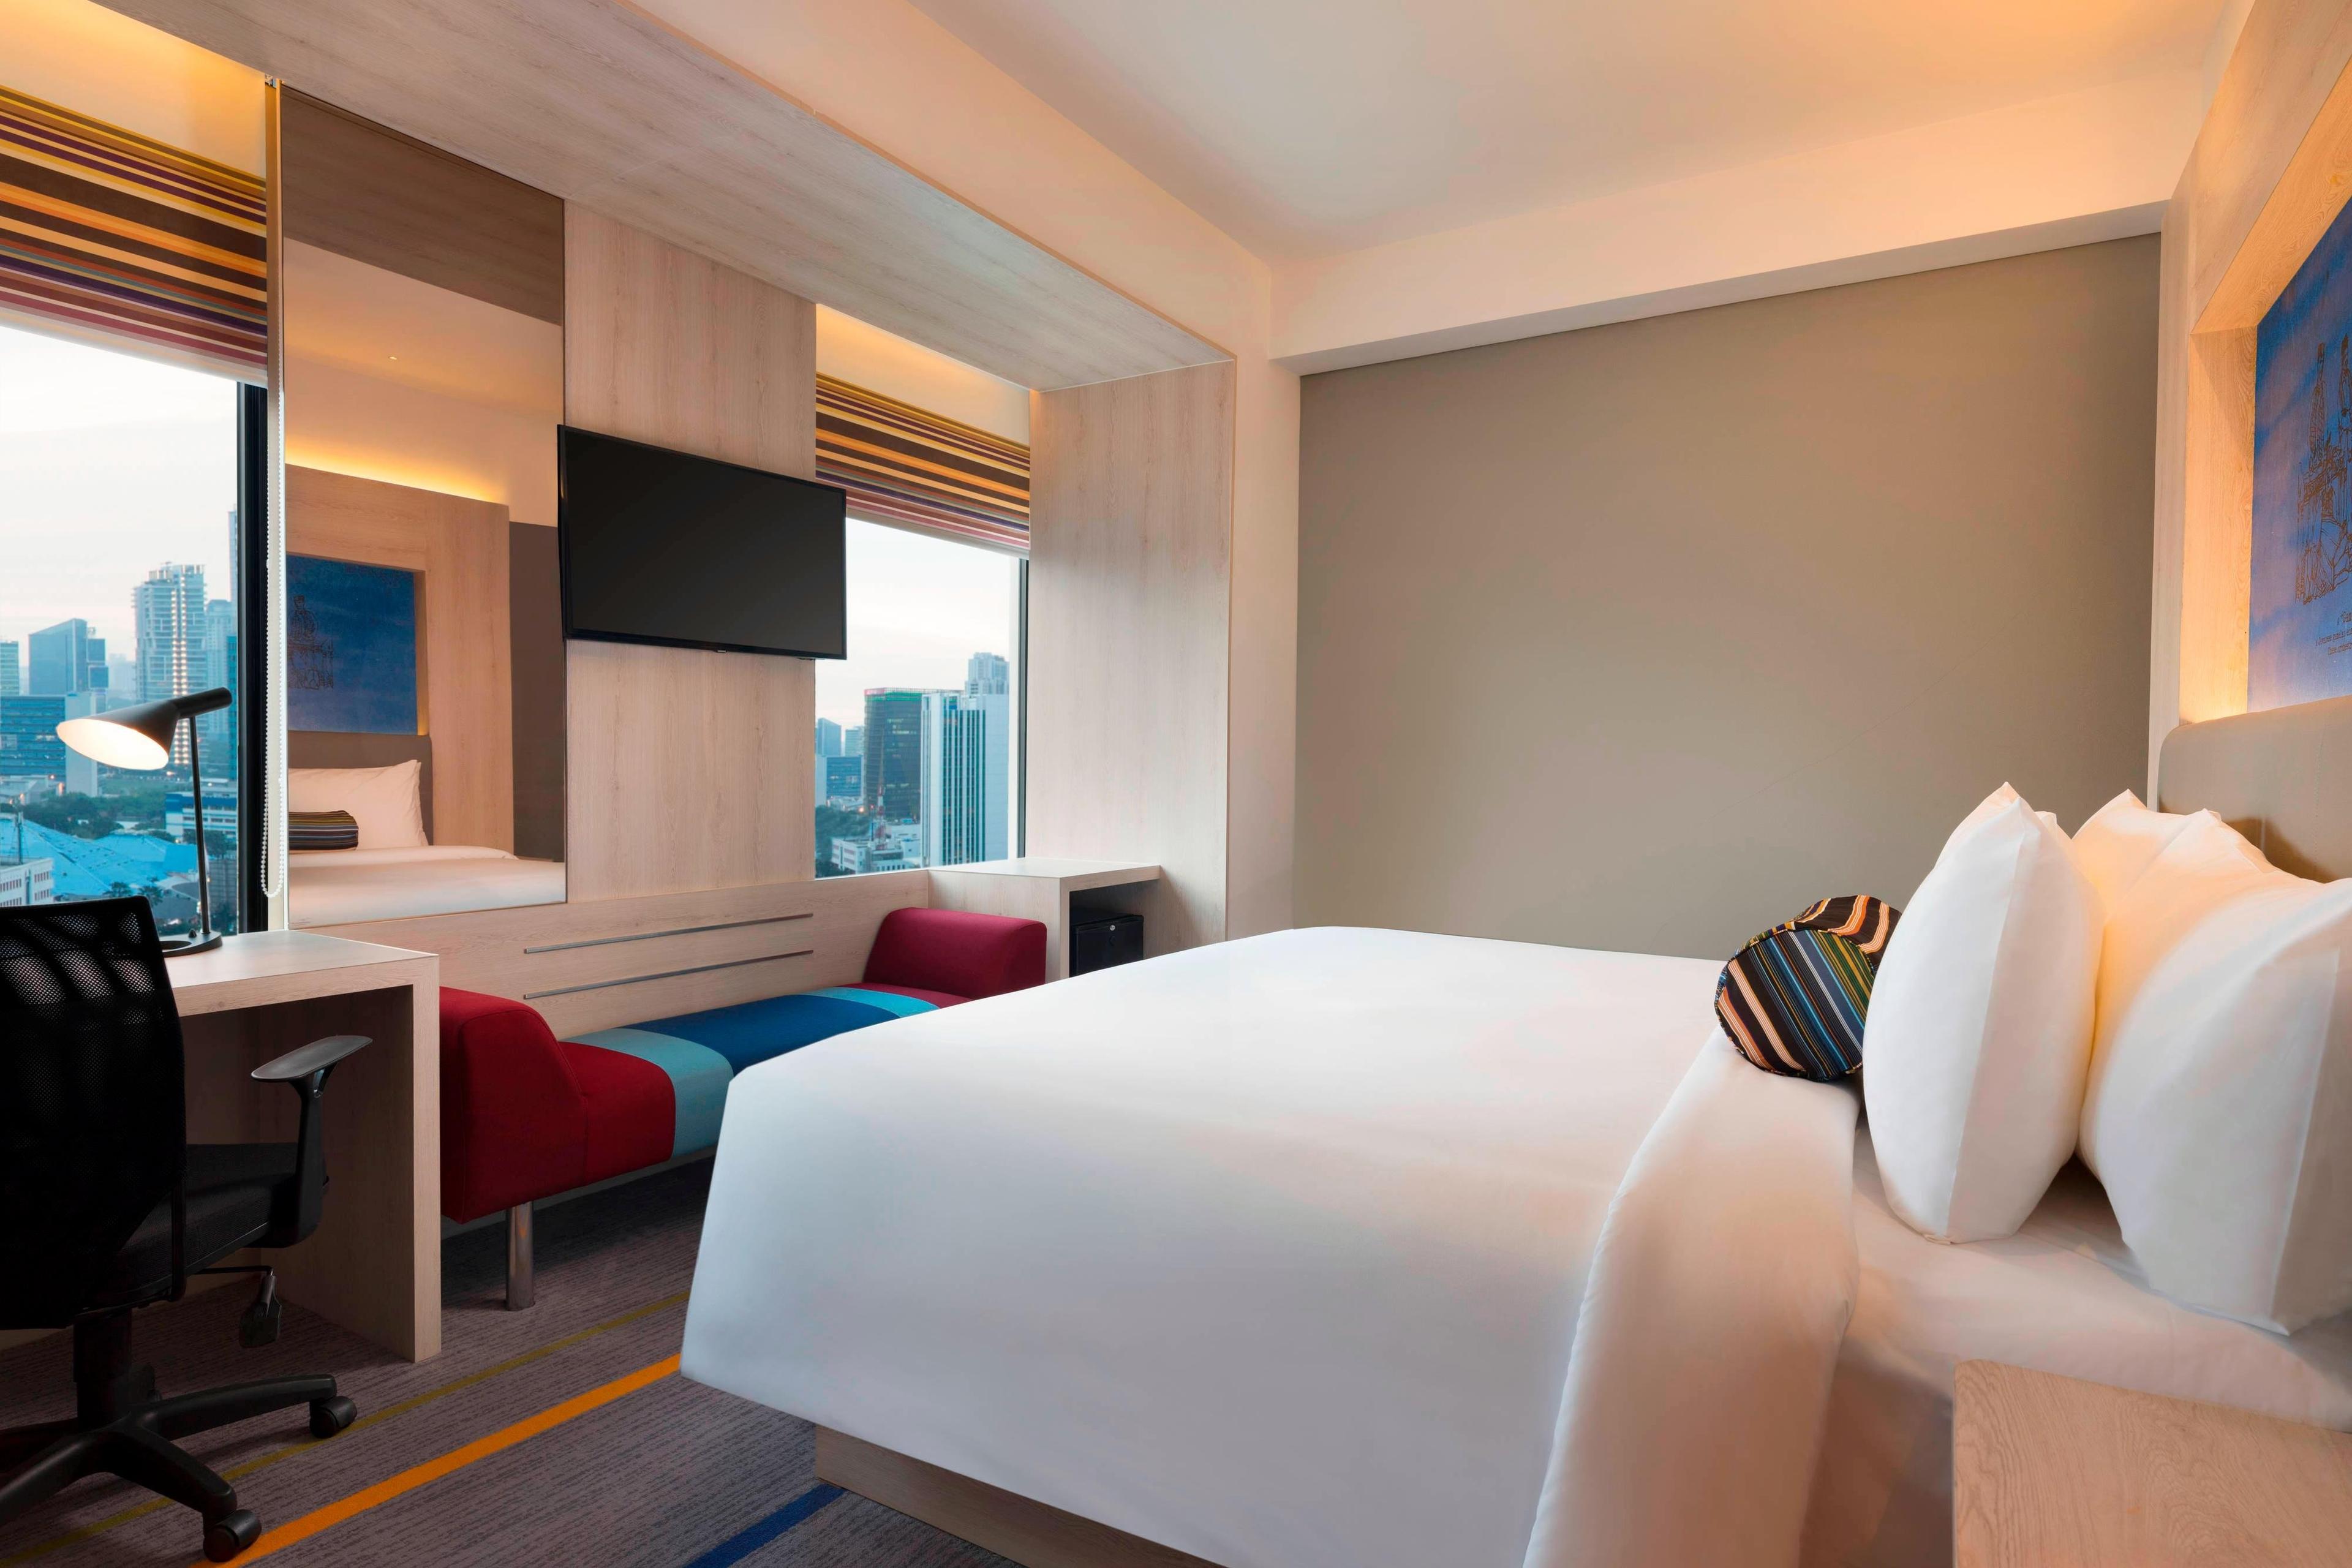 Enjoy panoramic Jakarta views from one of our sleek King Guest Rooms, which includes high-tech amenities like USB outlets and fast free Wi-Fi.